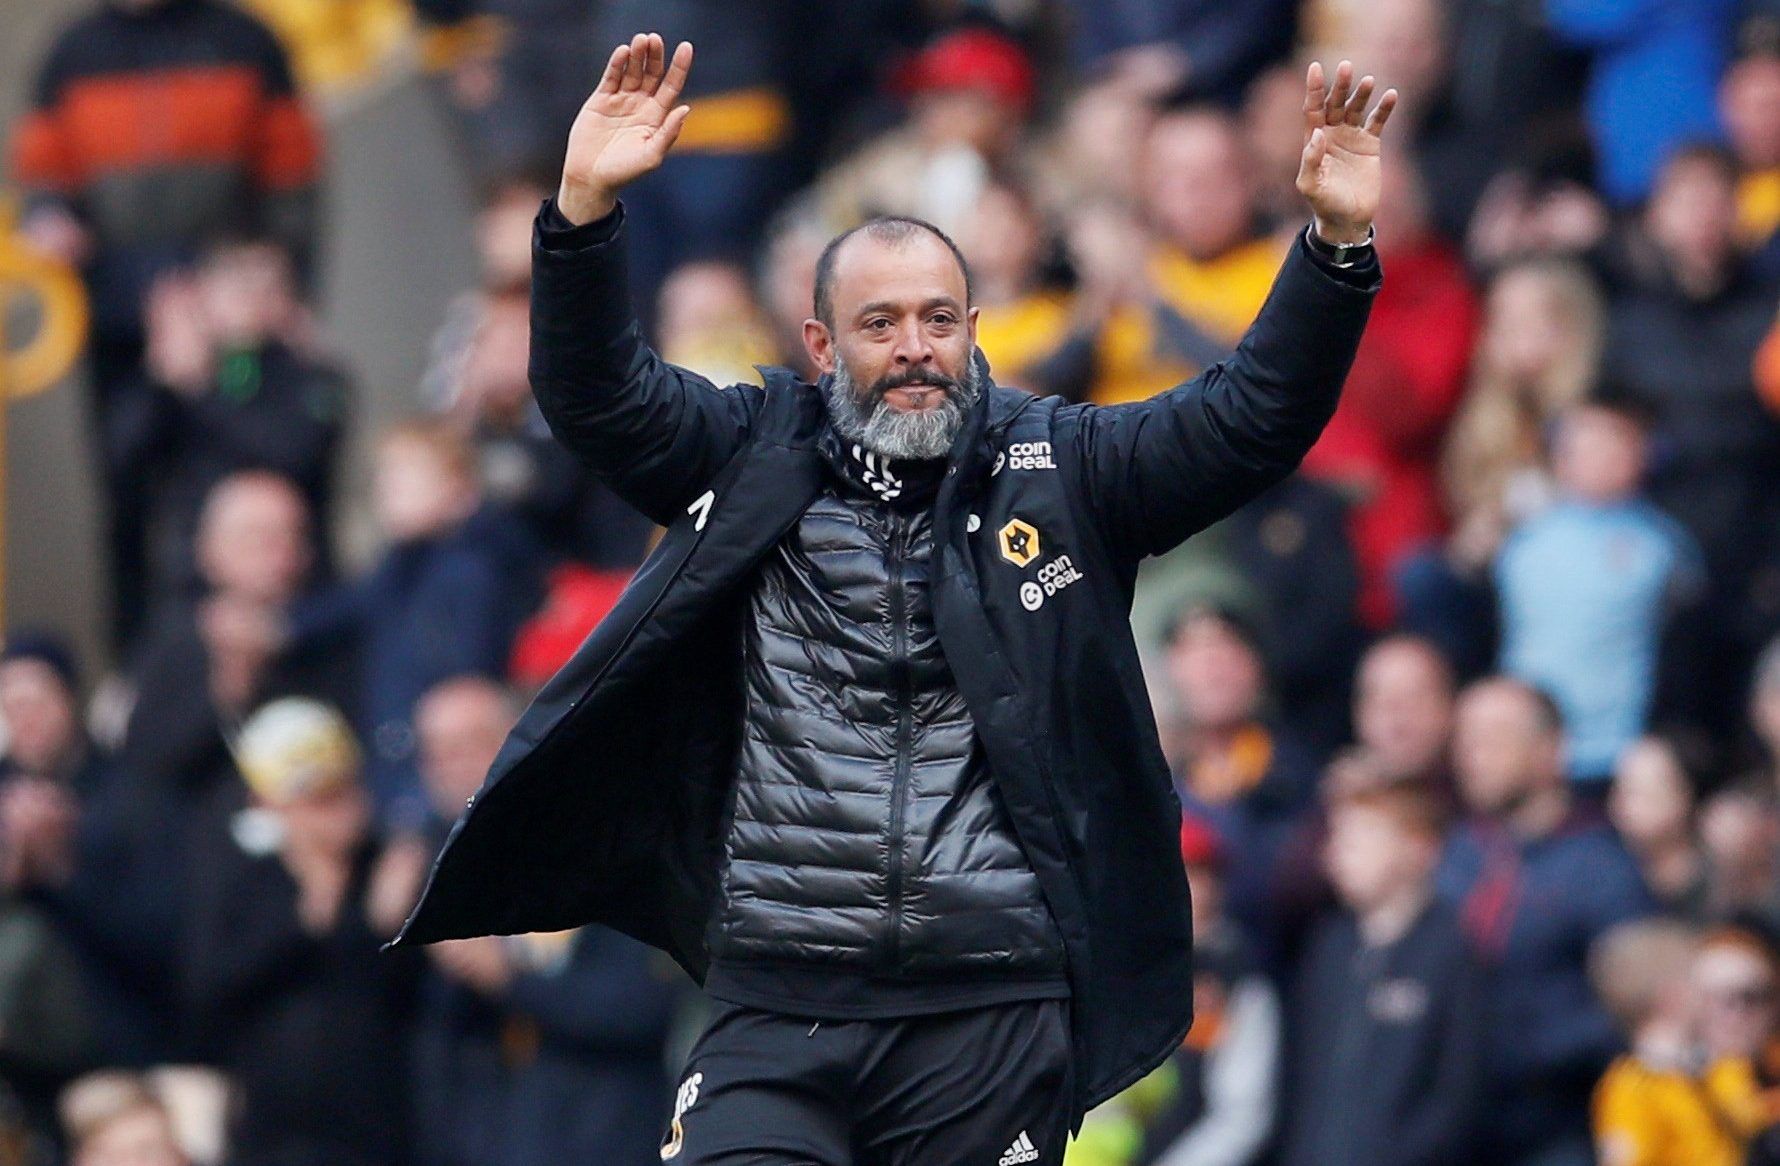 Soccer Football - Premier League - Wolverhampton Wanderers v Fulham - Molineux Stadium, Wolverhampton, Britain - May 4, 2019  Wolverhampton Wanderers manager Nuno Espirito Santo gesturs to the fans after the match  REUTERS/David Klein  EDITORIAL USE ONLY. No use with unauthorized audio, video, data, fixture lists, club/league logos or 